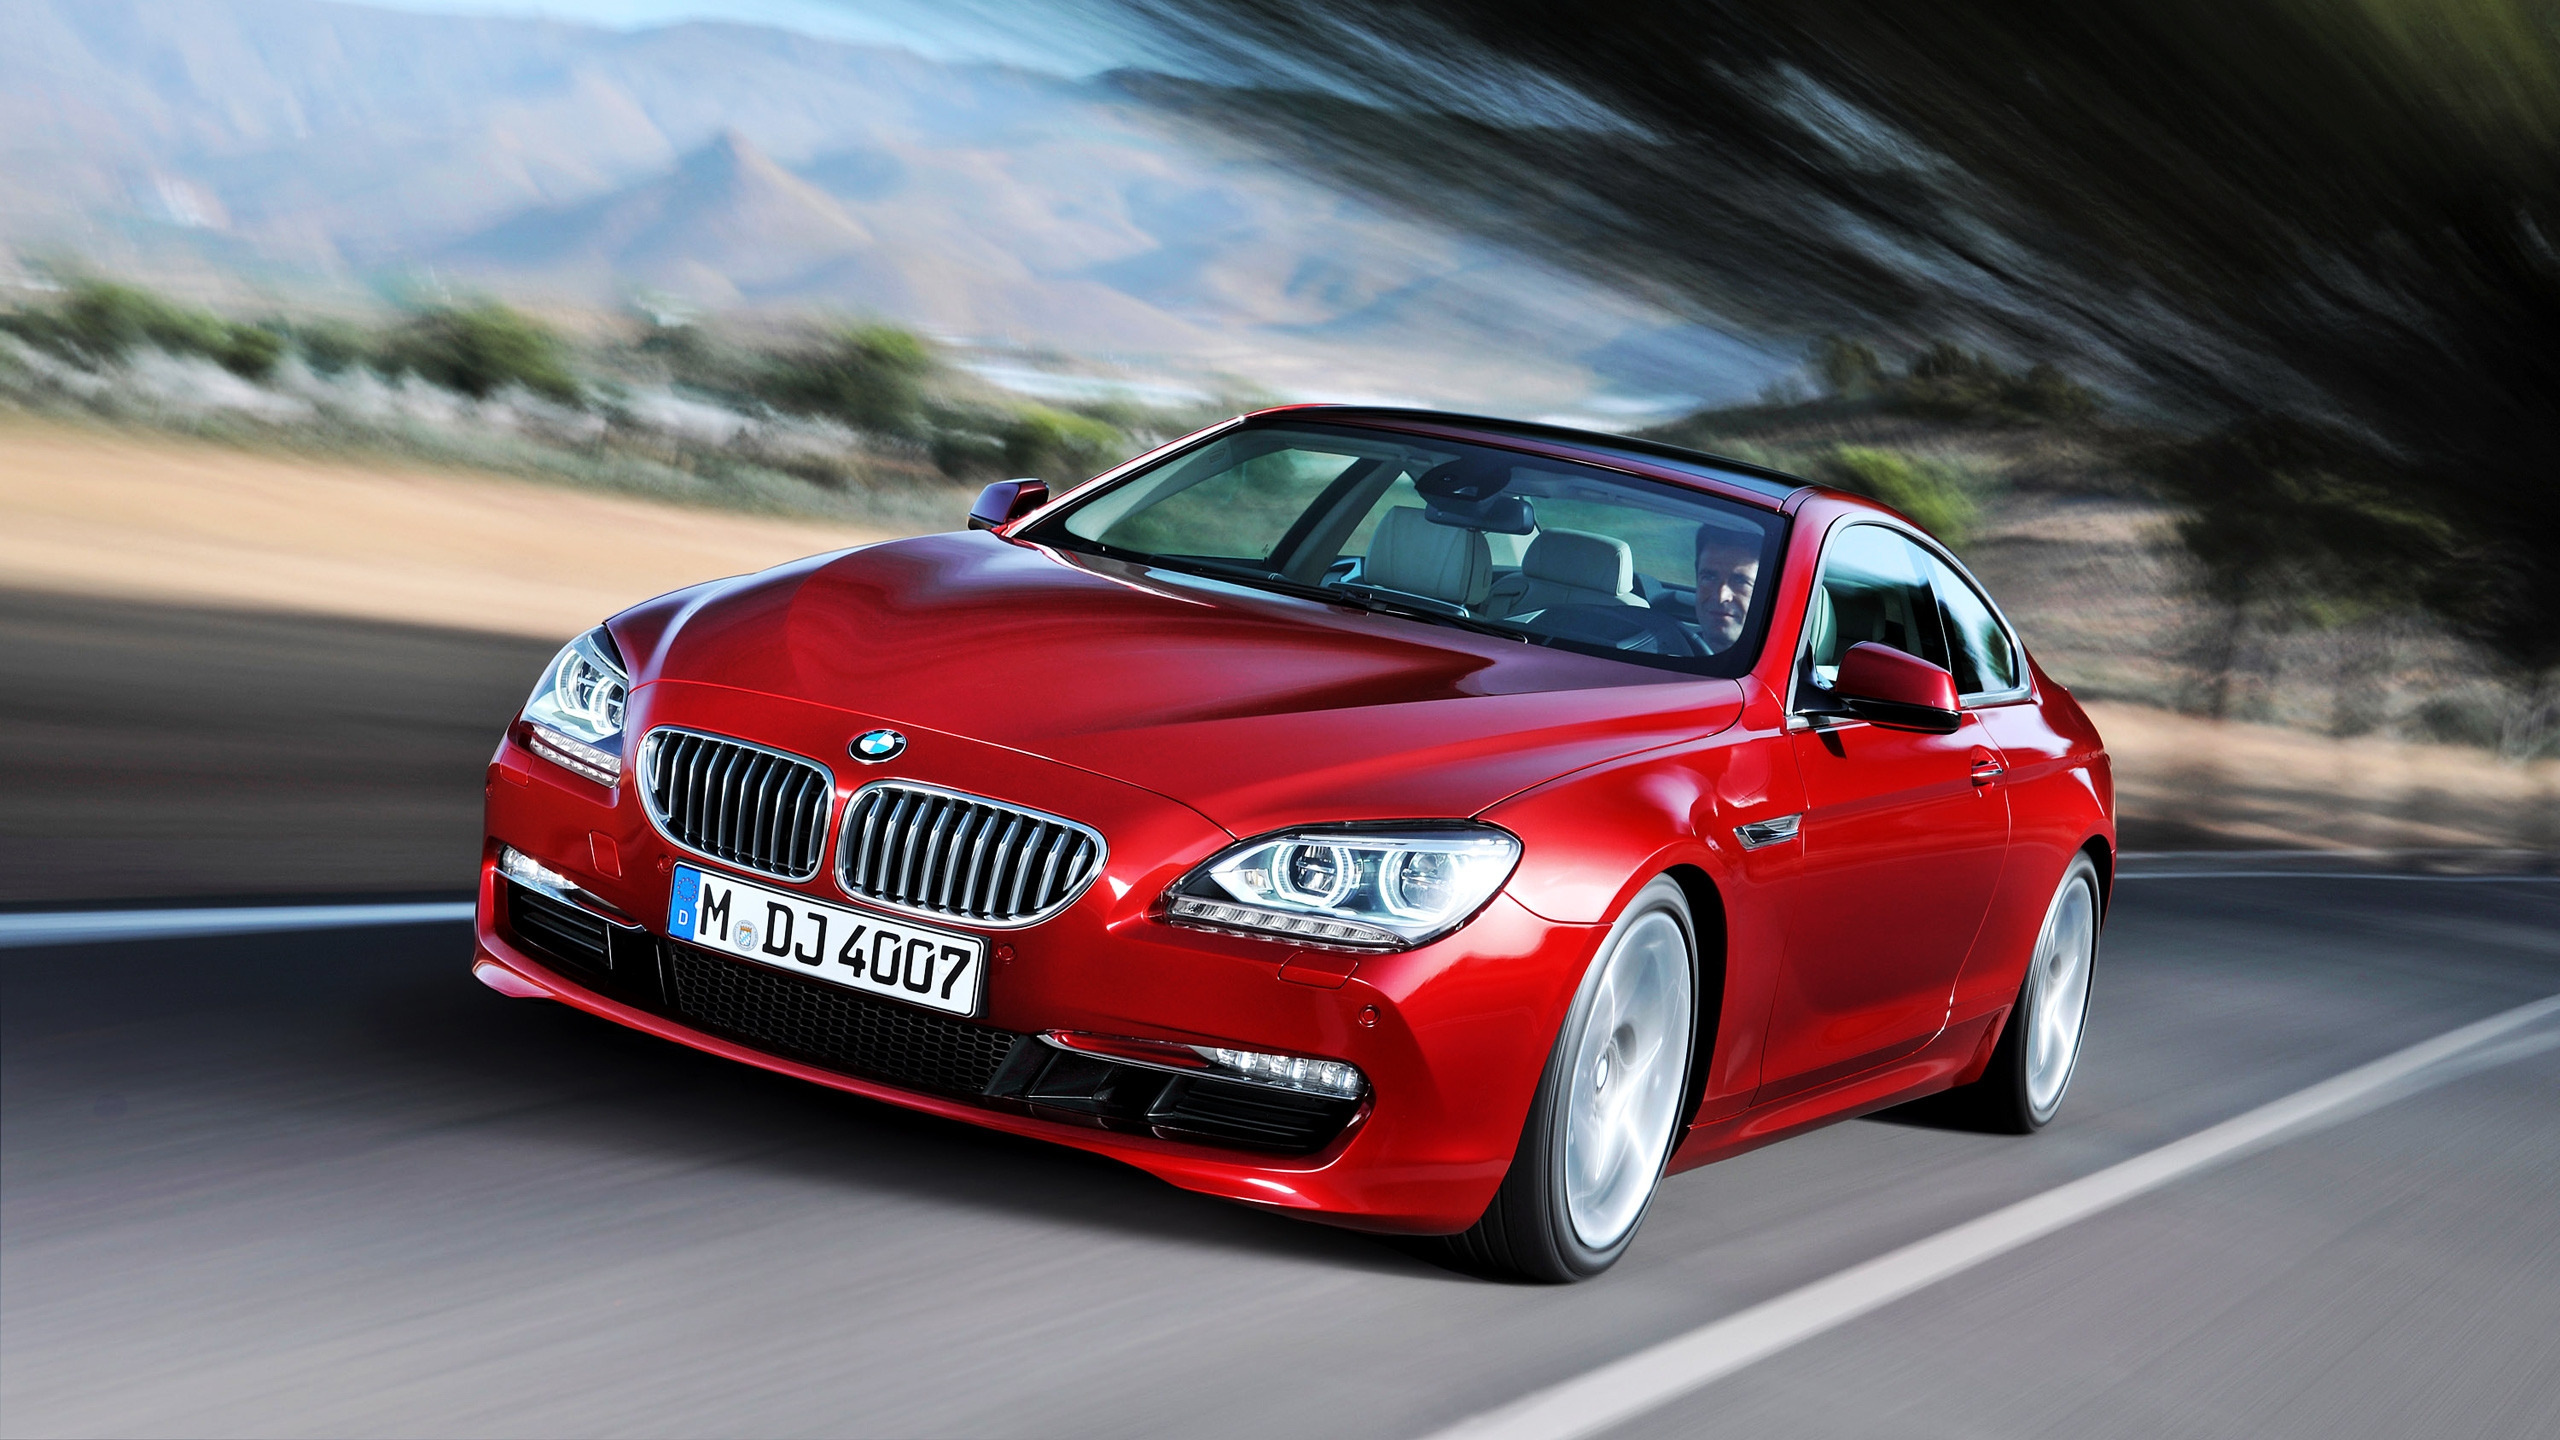 2012 BMW 650i Coupe for 2560x1440 HDTV resolution